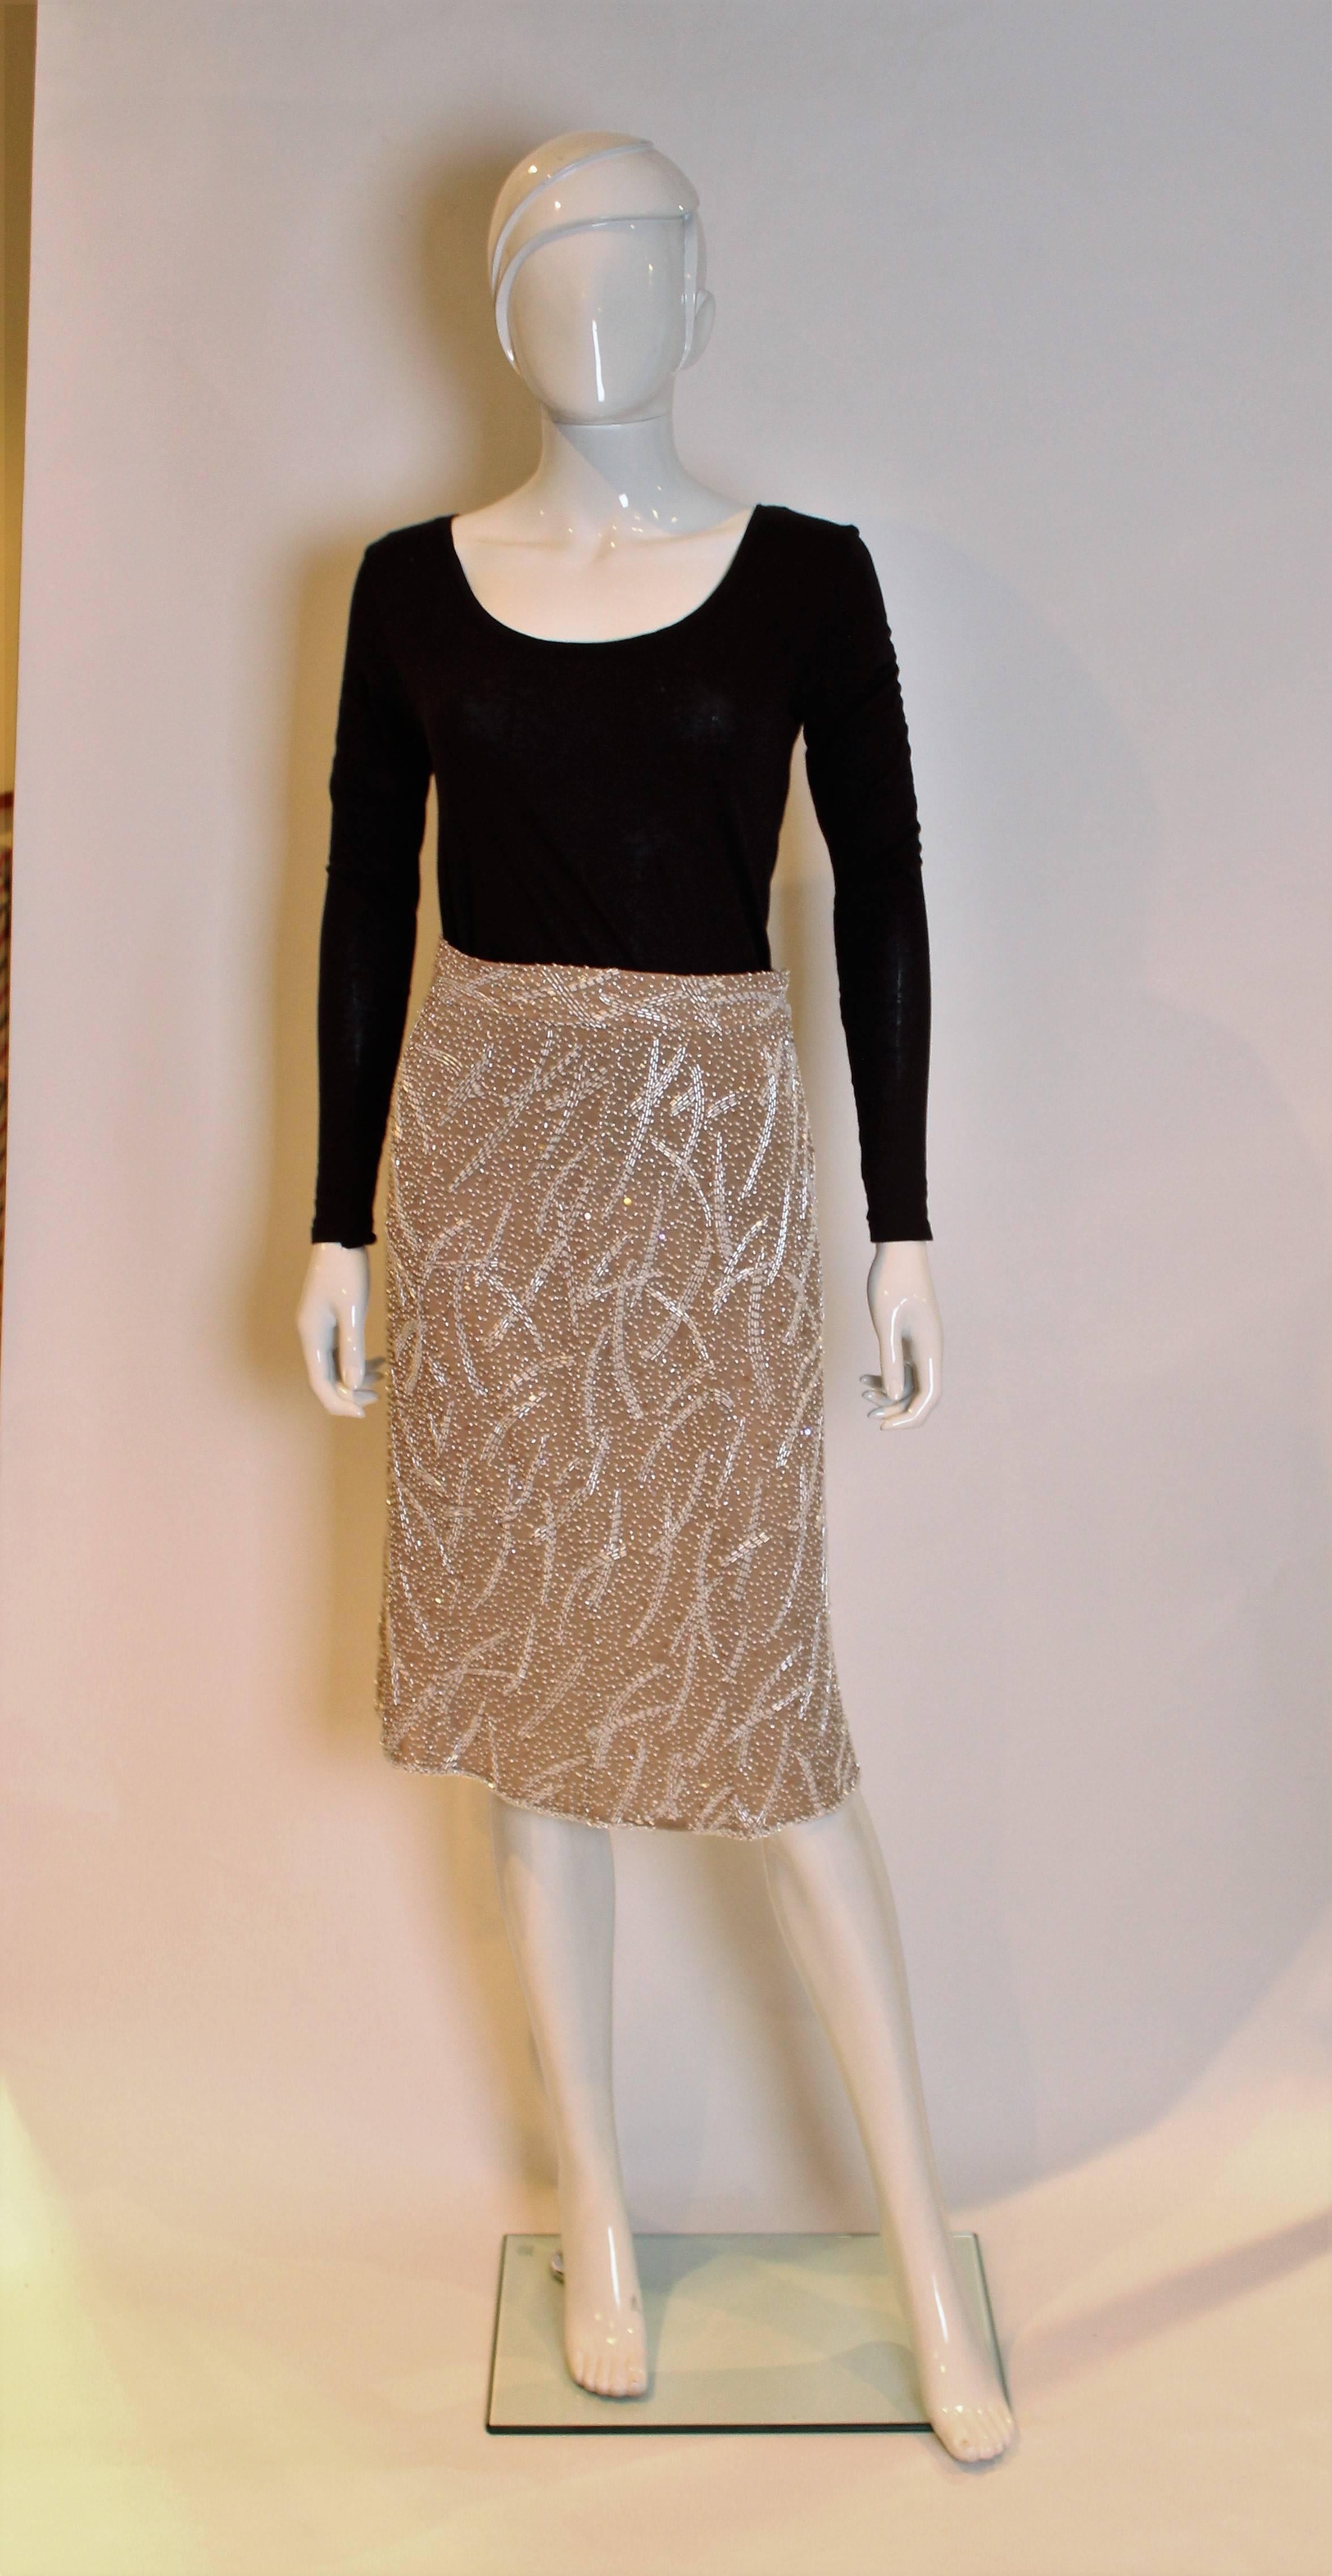 A great skirt by Tomasz Starzewski. In coffee coloured silk,inside and out, the skirt is covered in white beads and sequins.The skirt has a central back zip.



